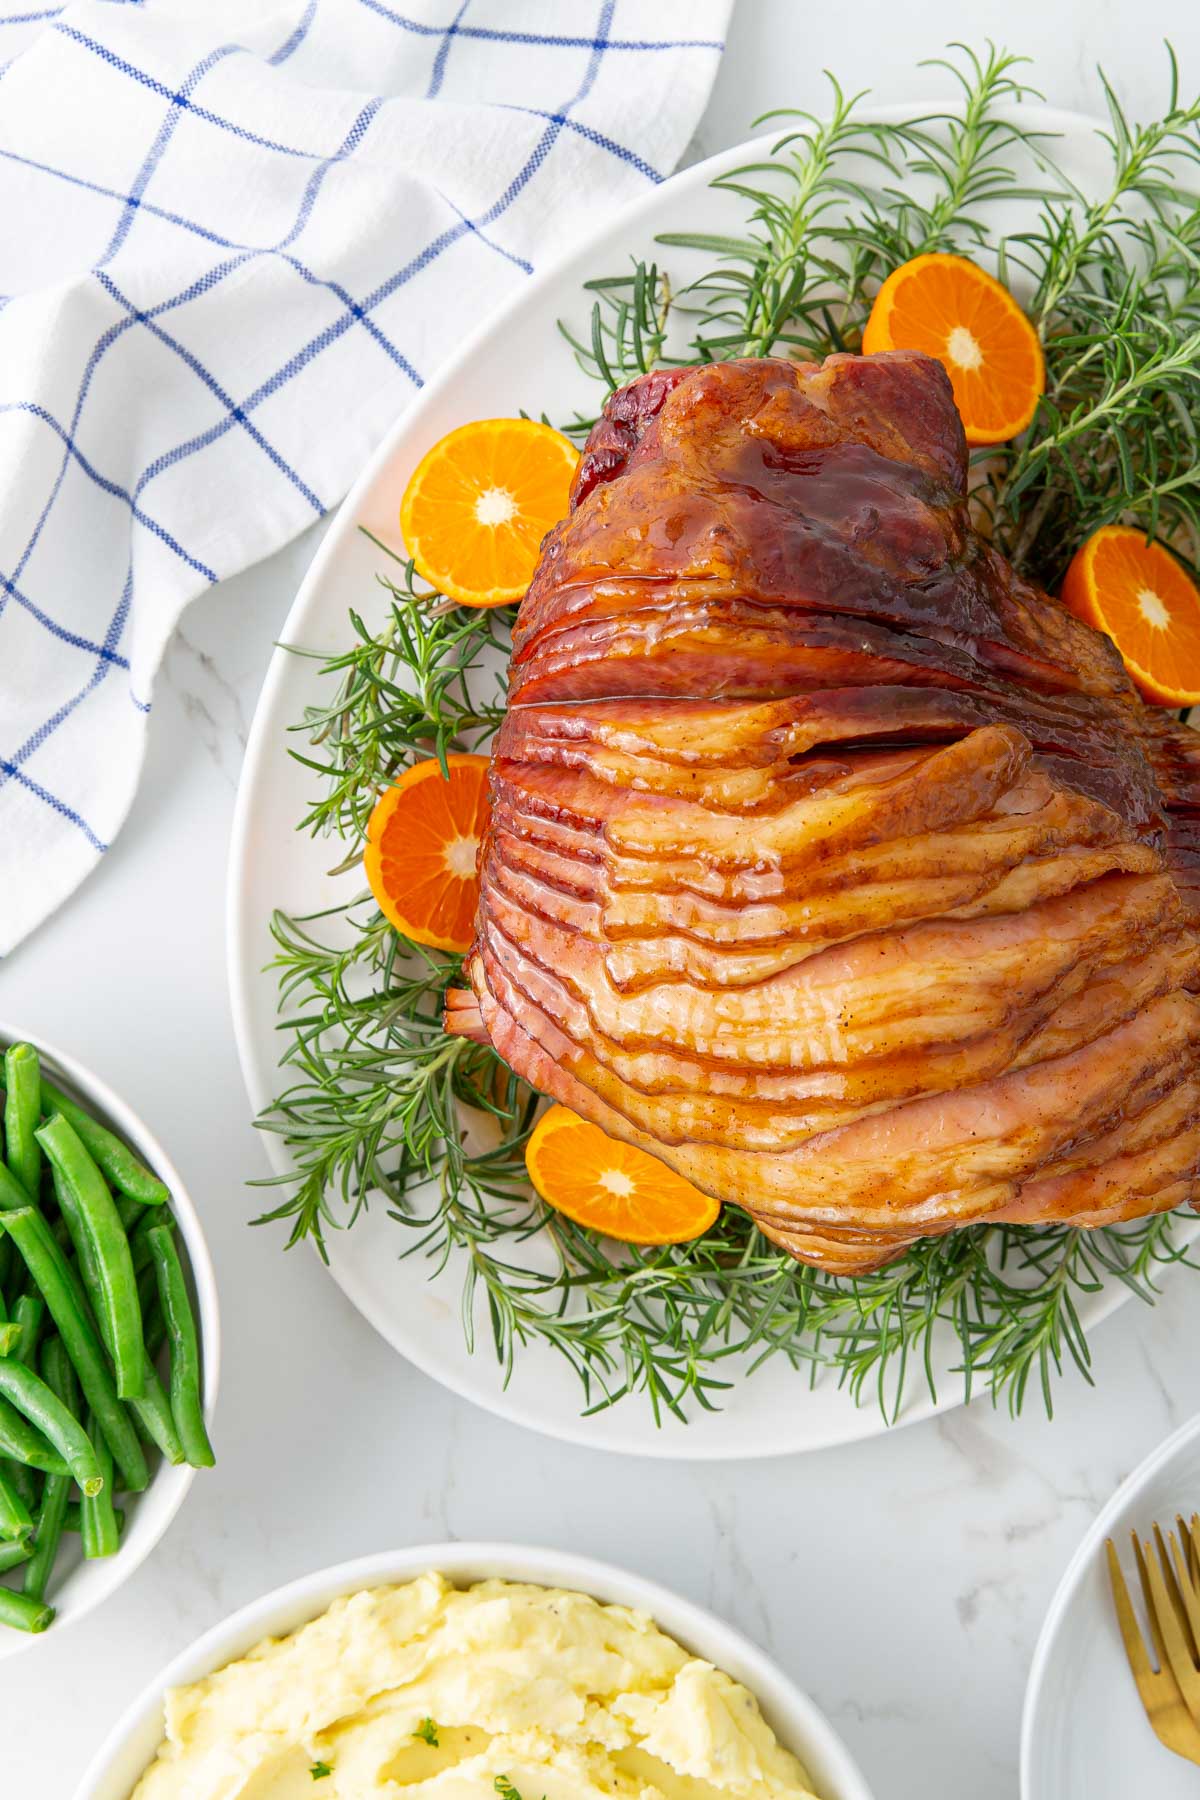 Overhead view of a glazed spiral ham beside a bowl of mashed potatoes and a bowl of green beans.